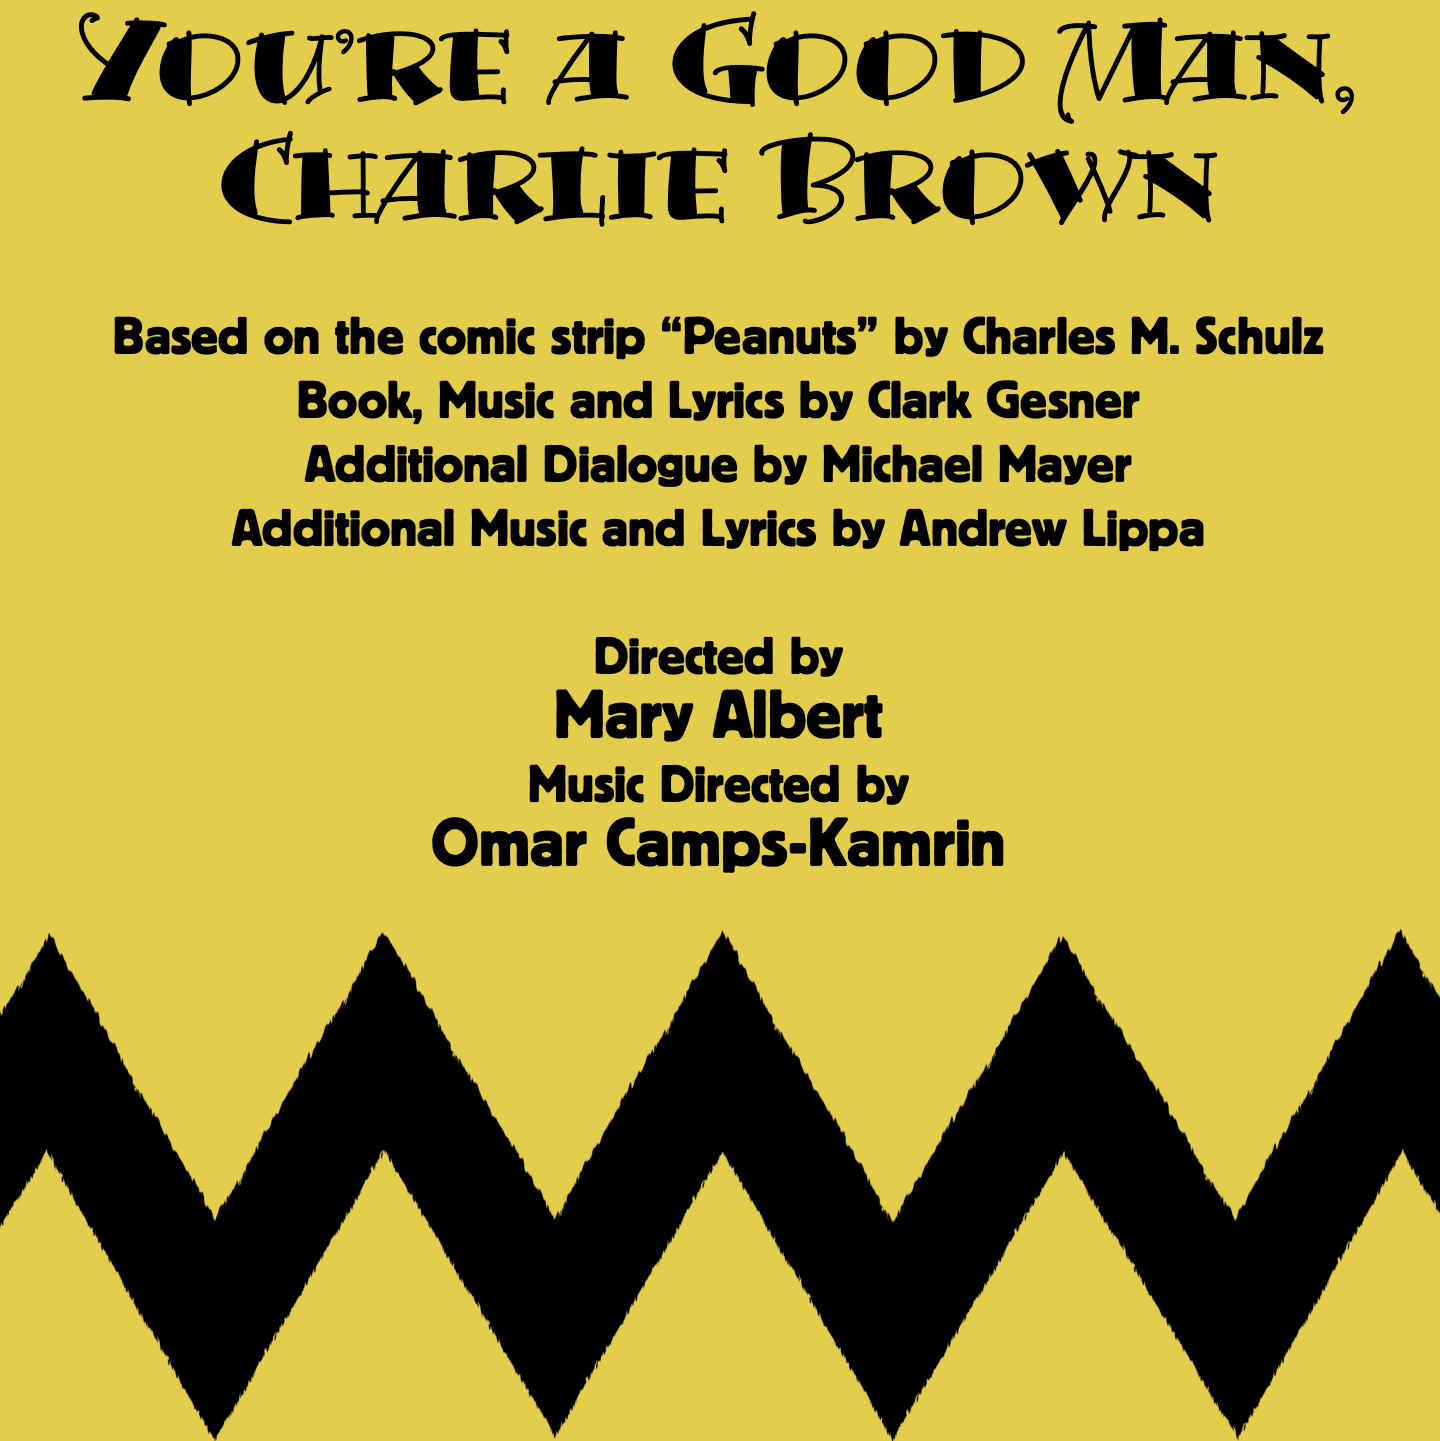 "Good grief!" was it a pleasure for Omar to music direct Different Directions production of "You're a Good Man Charlie Brown" alongside director Mary Albert!